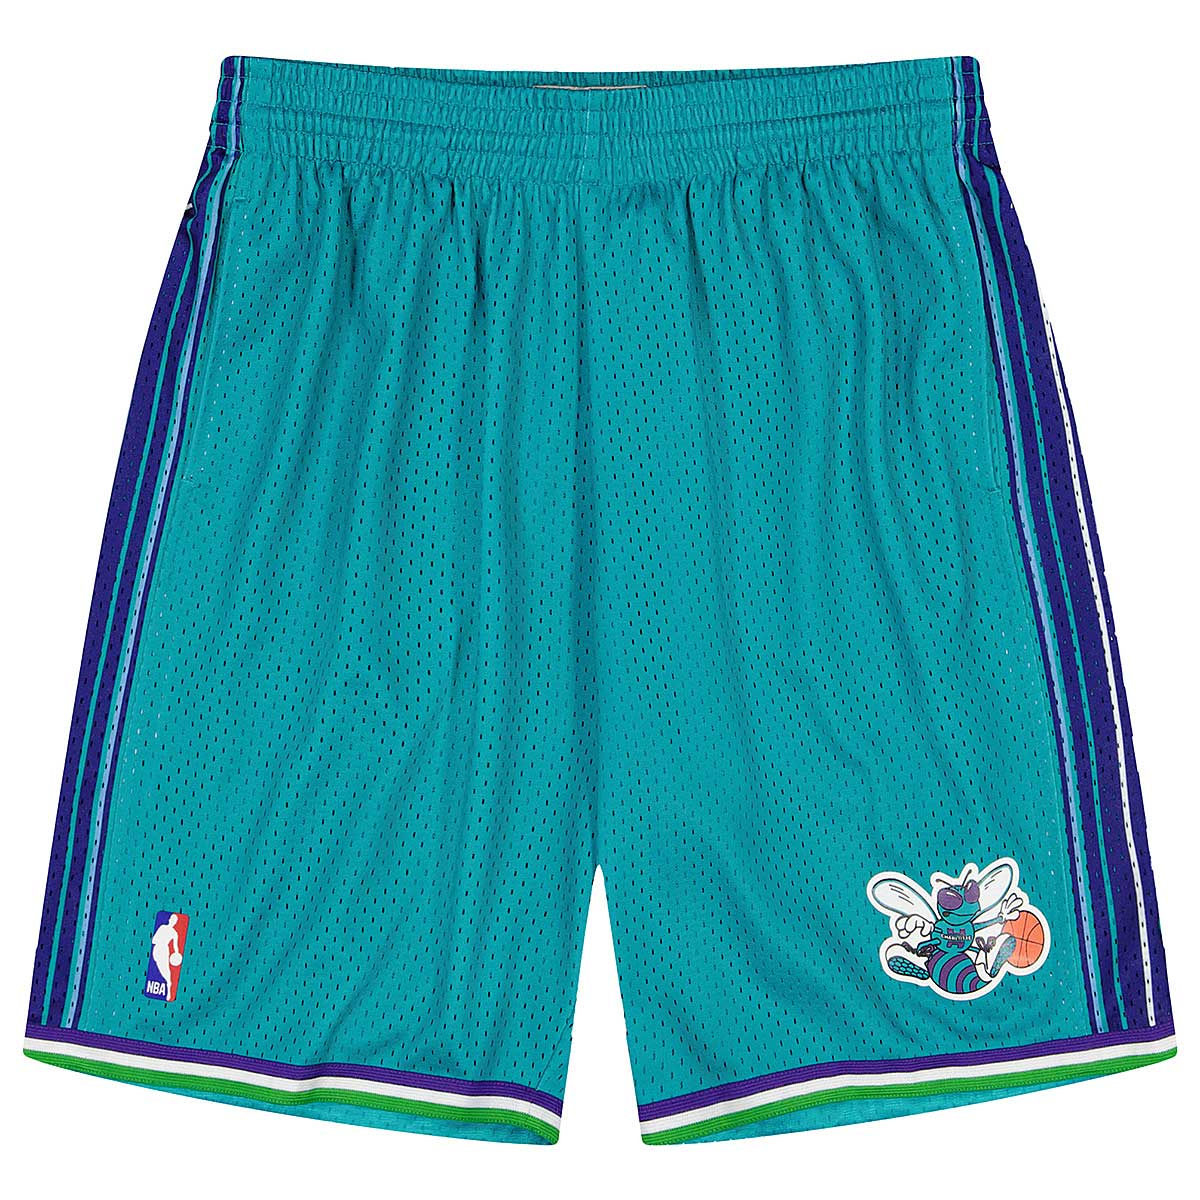  Mitchell & Ness NBA Road Swingman Shorts Hornets 99-00 Teal MD  9 : Sports & Outdoors